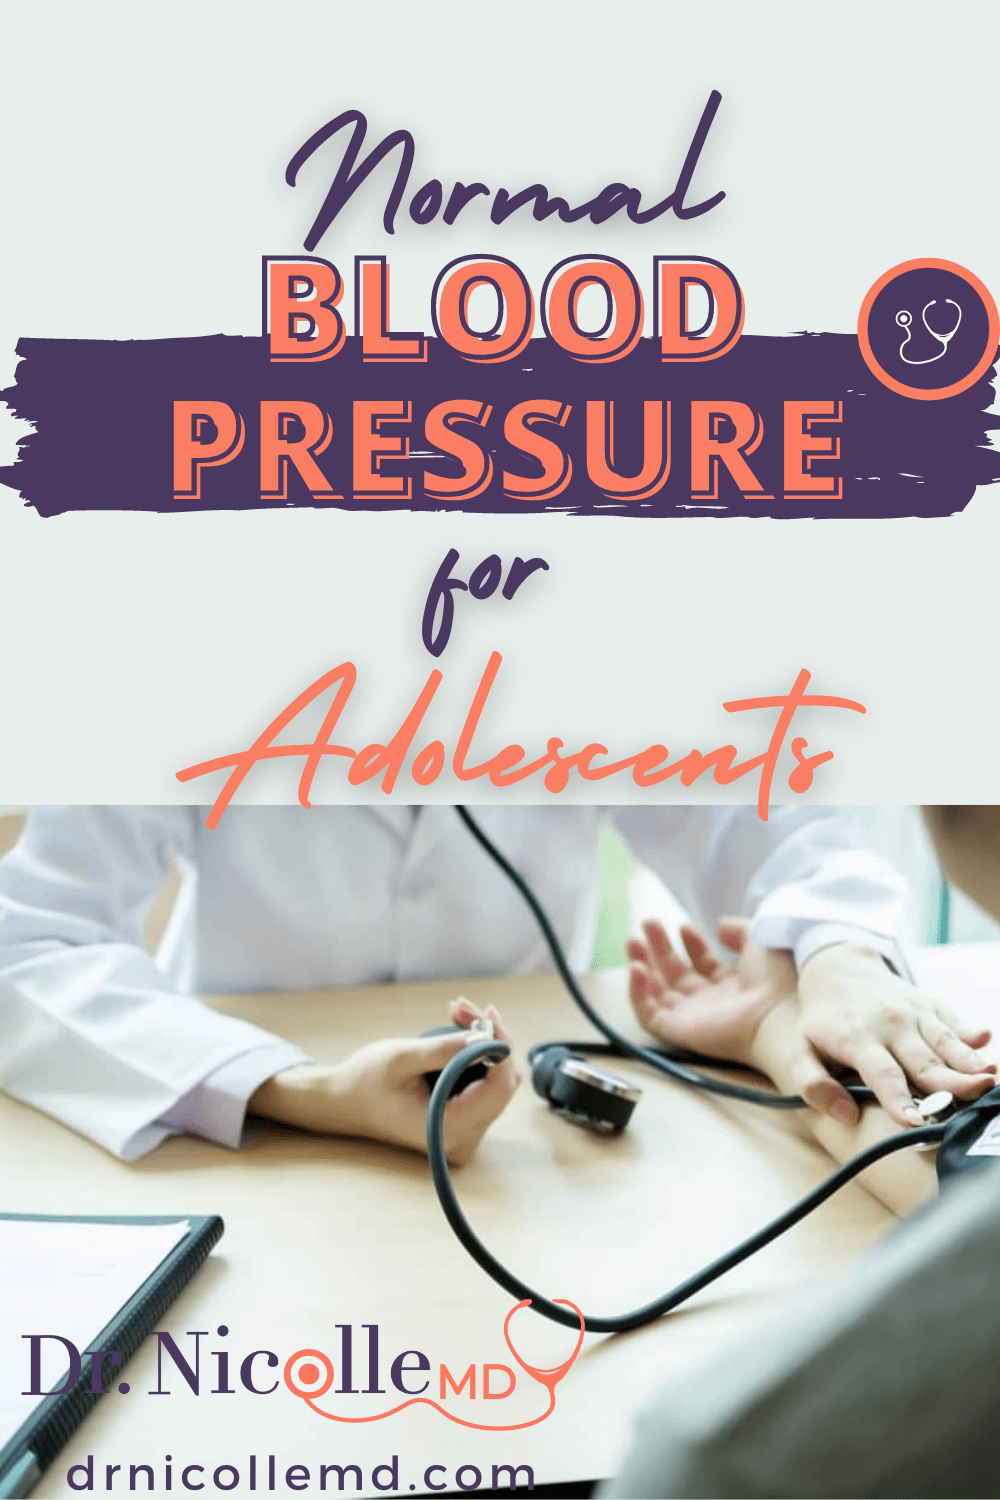 Normal Blood Pressure for Adolescents